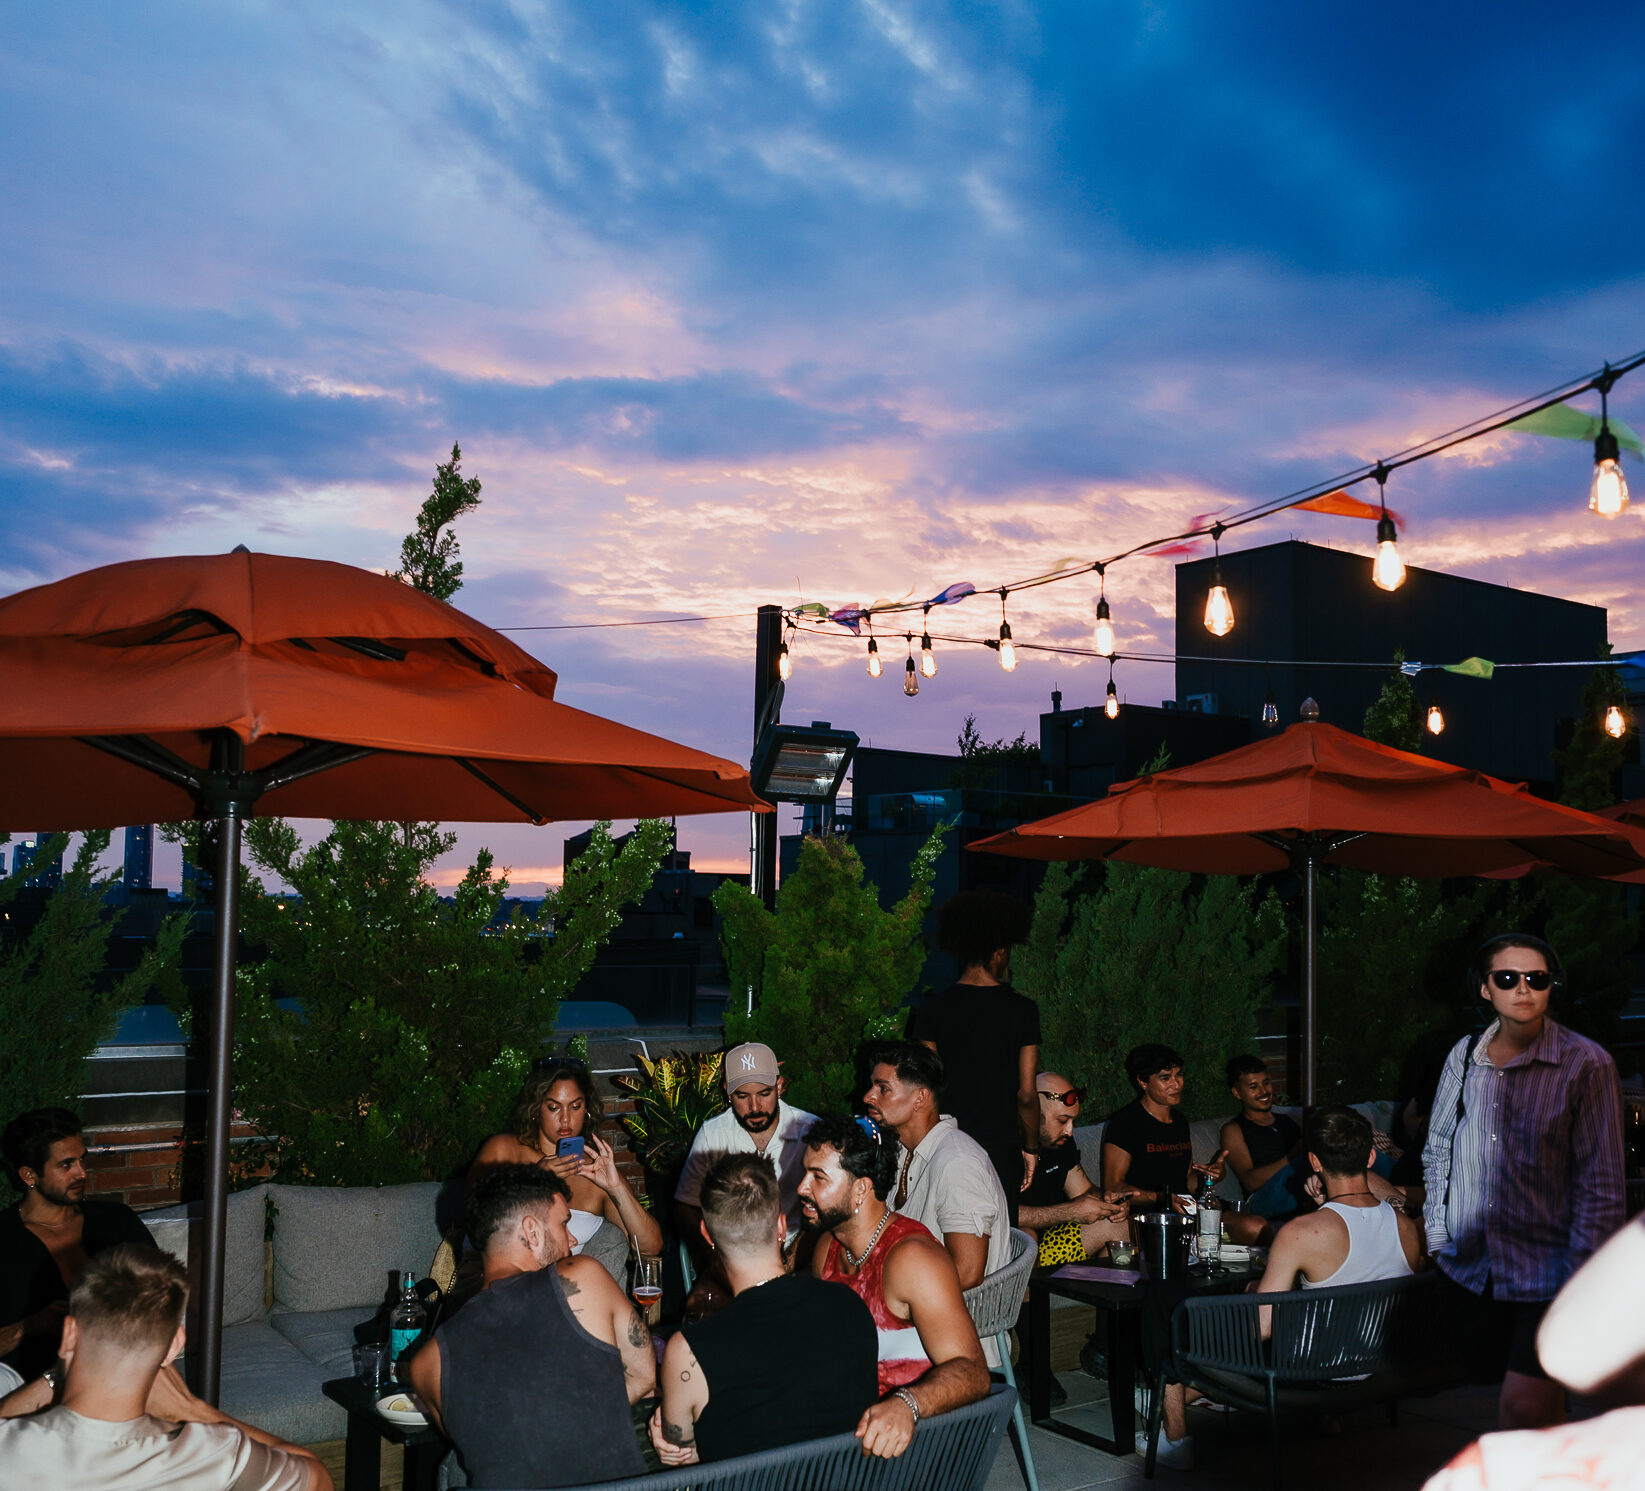 A group of people enjoy an evening at Arlo SoHogathering on a rooftop patio with string lights and orange umbrellas, against a backdrop of a colorful sunset sky.